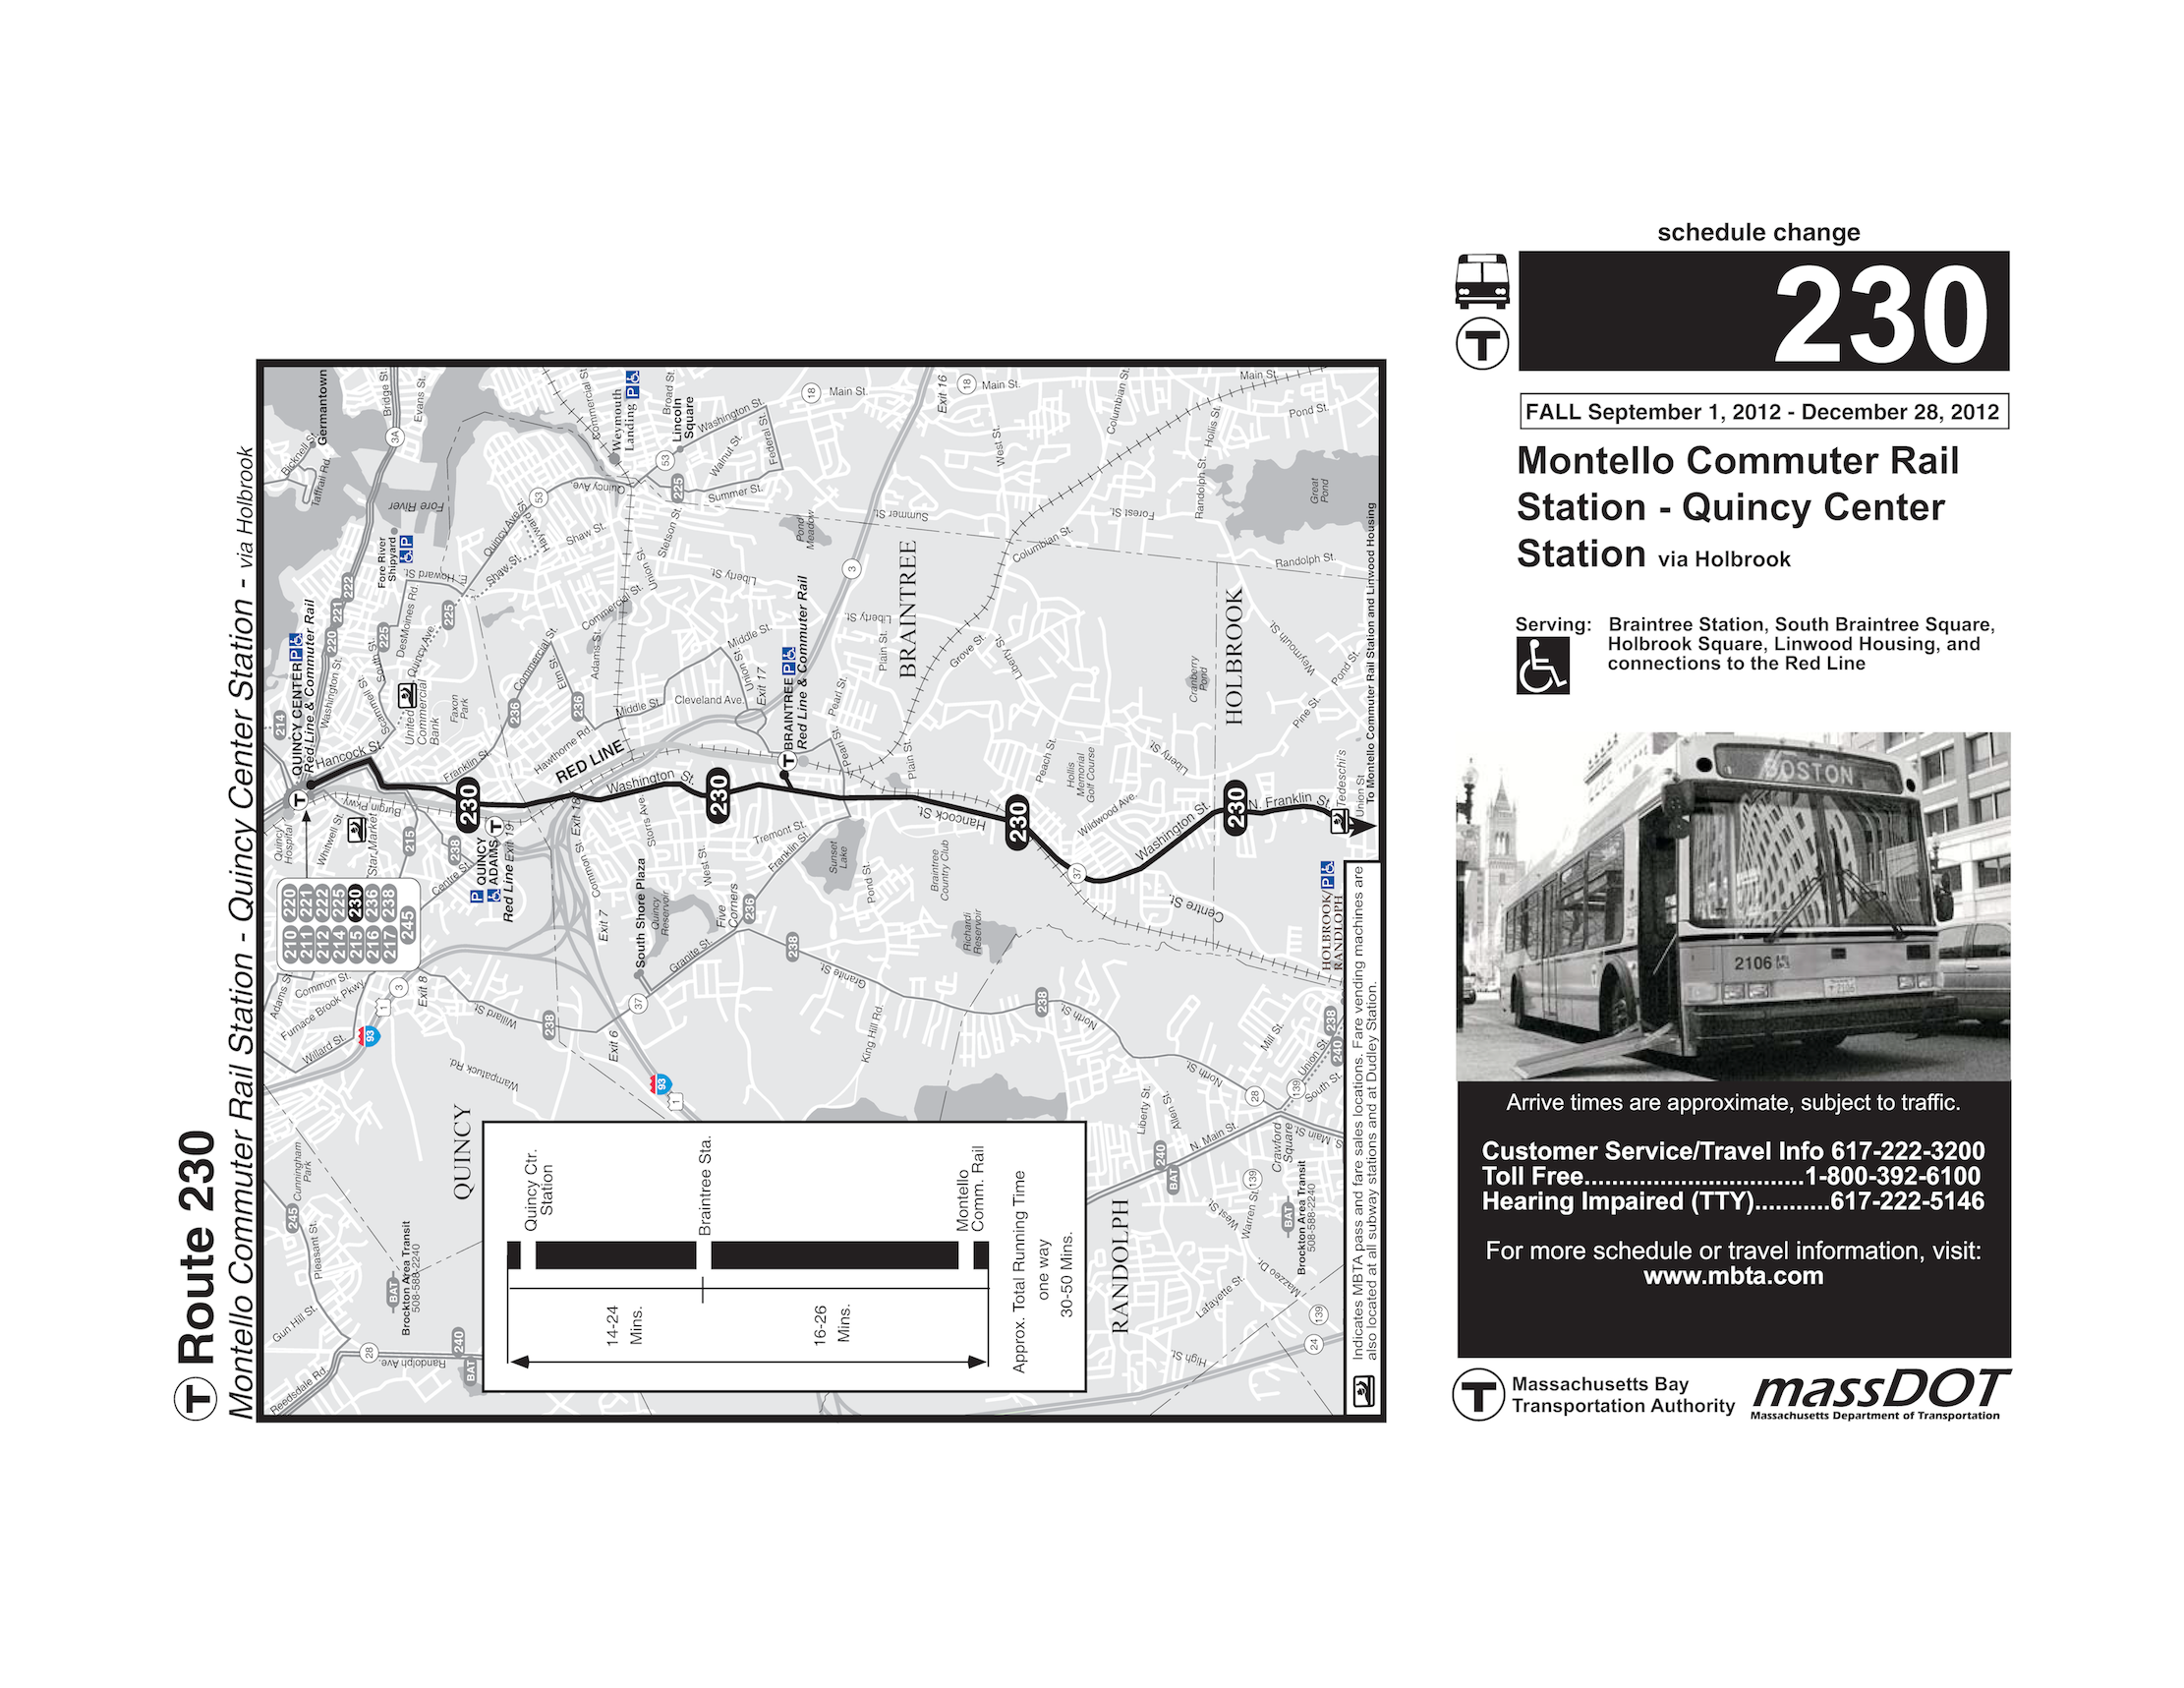 This page is the MBTA map of bus Route 230, between Montello Commuter Rail Station and Quincy Center Station.